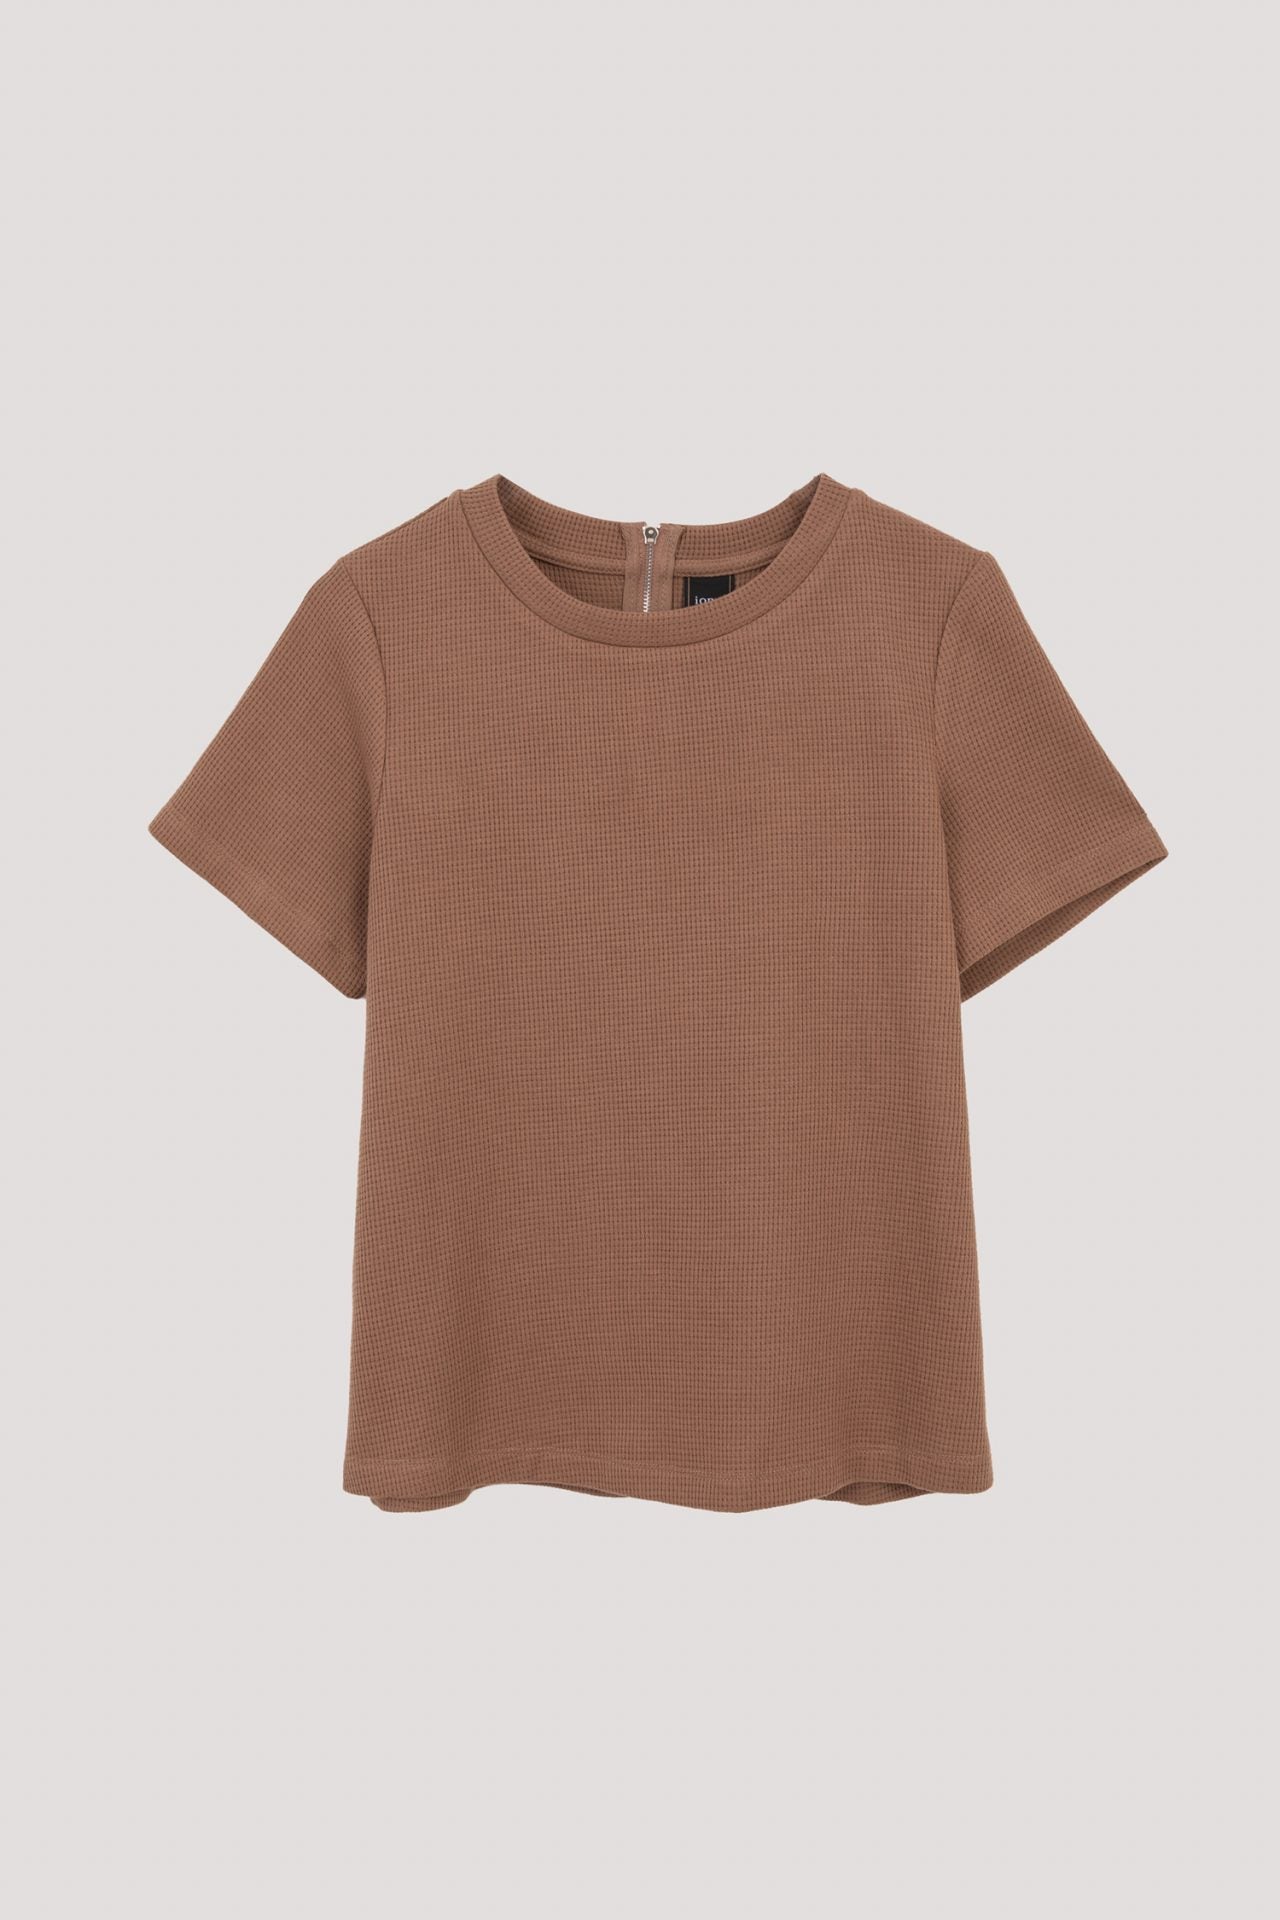 AT 10051 ROUND NECK TEE BROWN